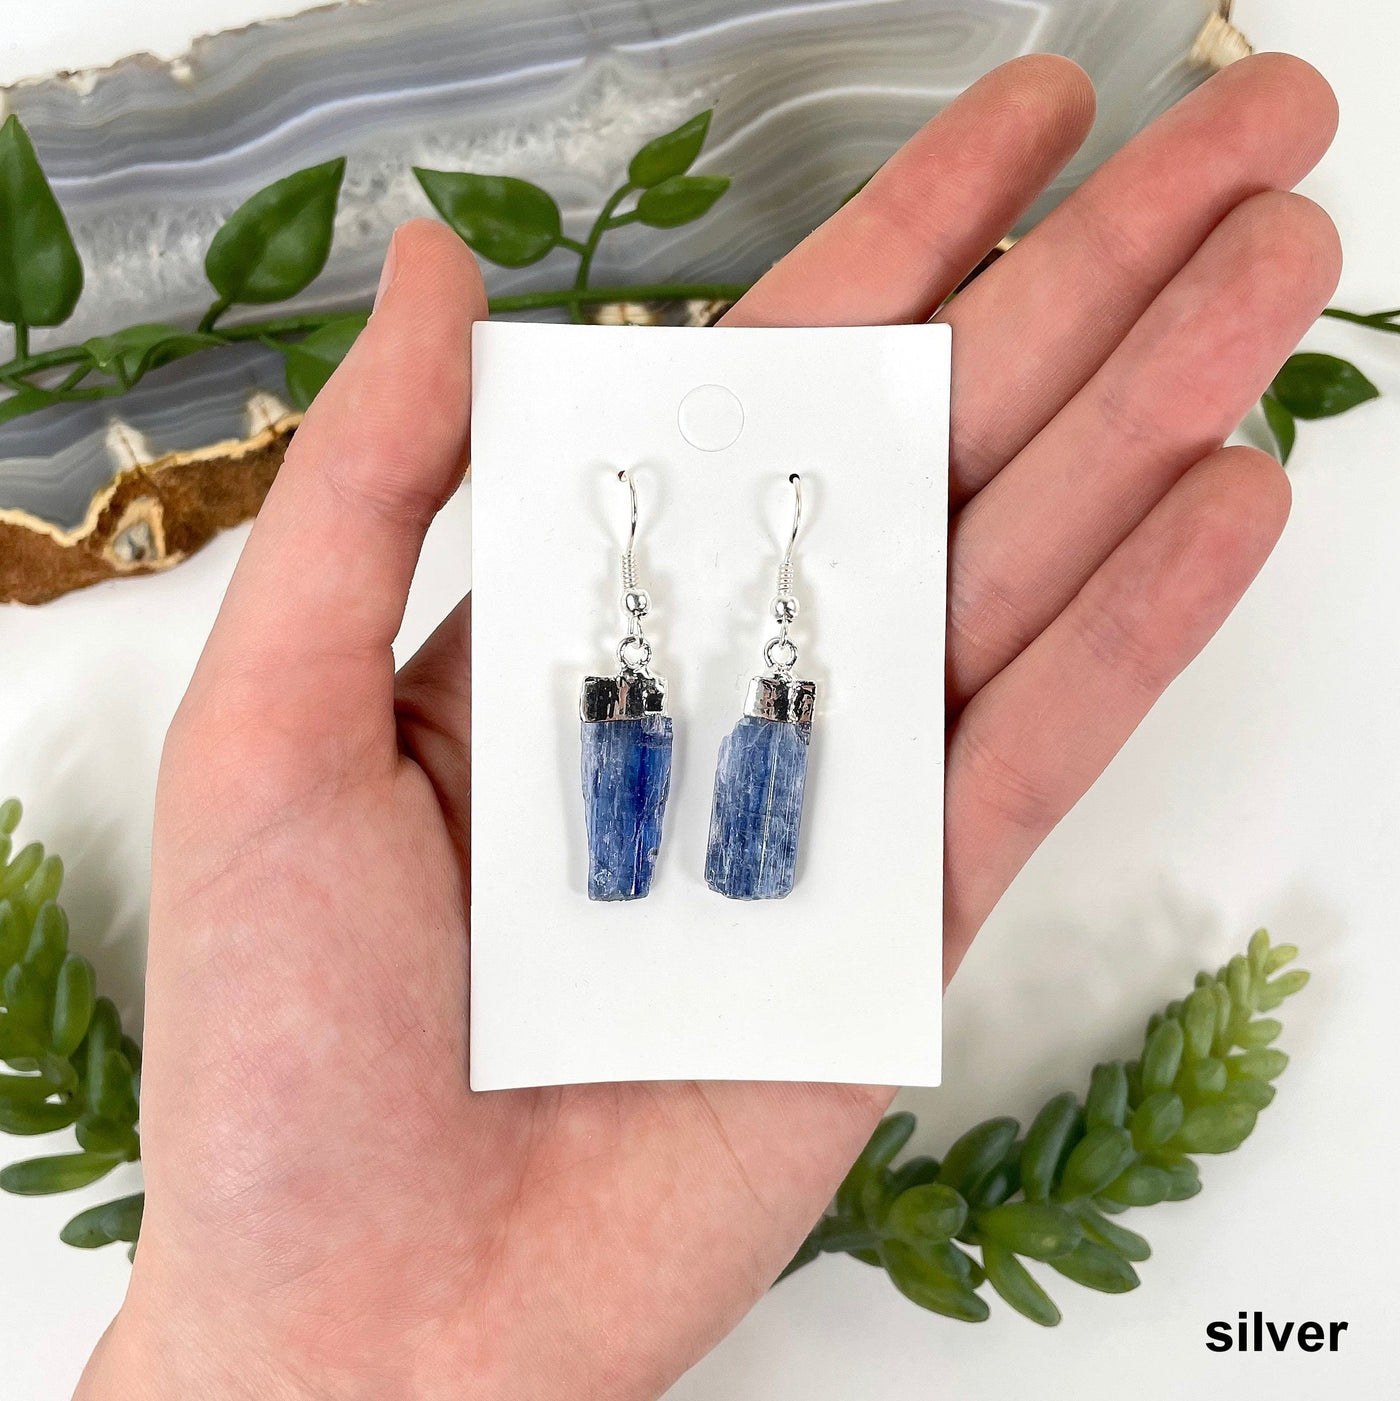 silver blue kyanite earrings in hand for size and finish reference